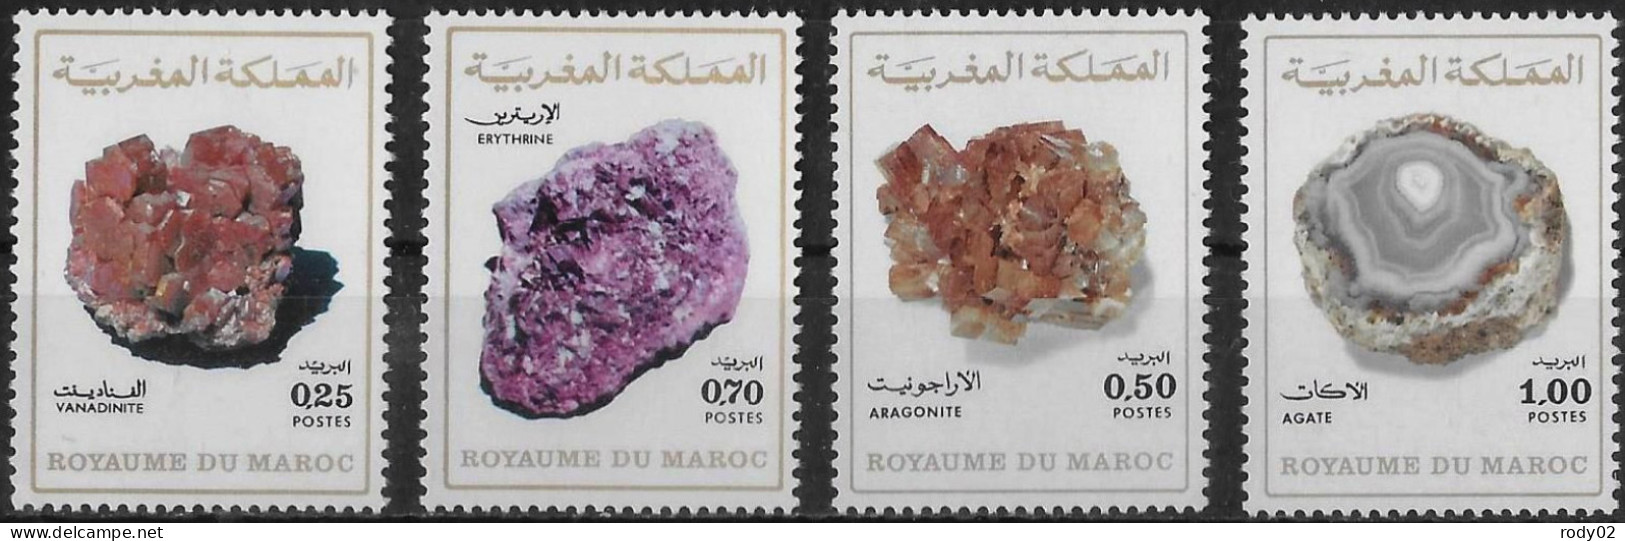 MAROC - ROCHES MINERALES - N° 698 A 699 ET 721 A 722 - NEUF** MNH - Minerales